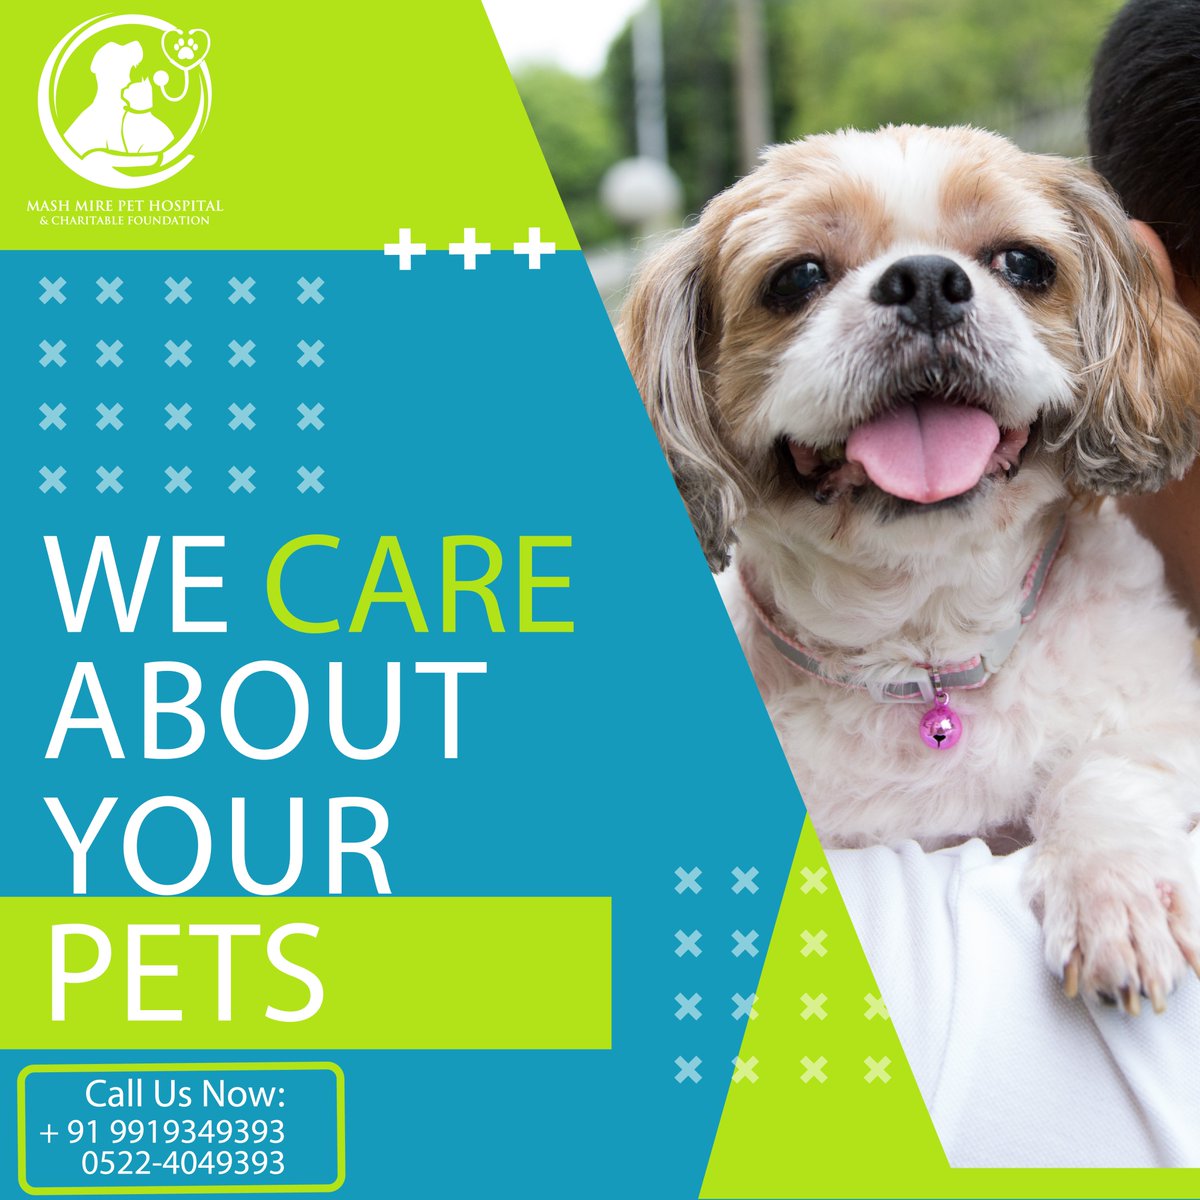 We care about your pets❤️

📅Book an appointment: Call +91 9919349393 / 0522-4049393 or mail at mashmirepethospital@gmail.com

#HolisticPetCare #EmergencyVet #PetSurgery #PetDiagnostics #WellnessCheck #AnimalEmergency #PetRehabilitation #VetTechnology #PetDentistry